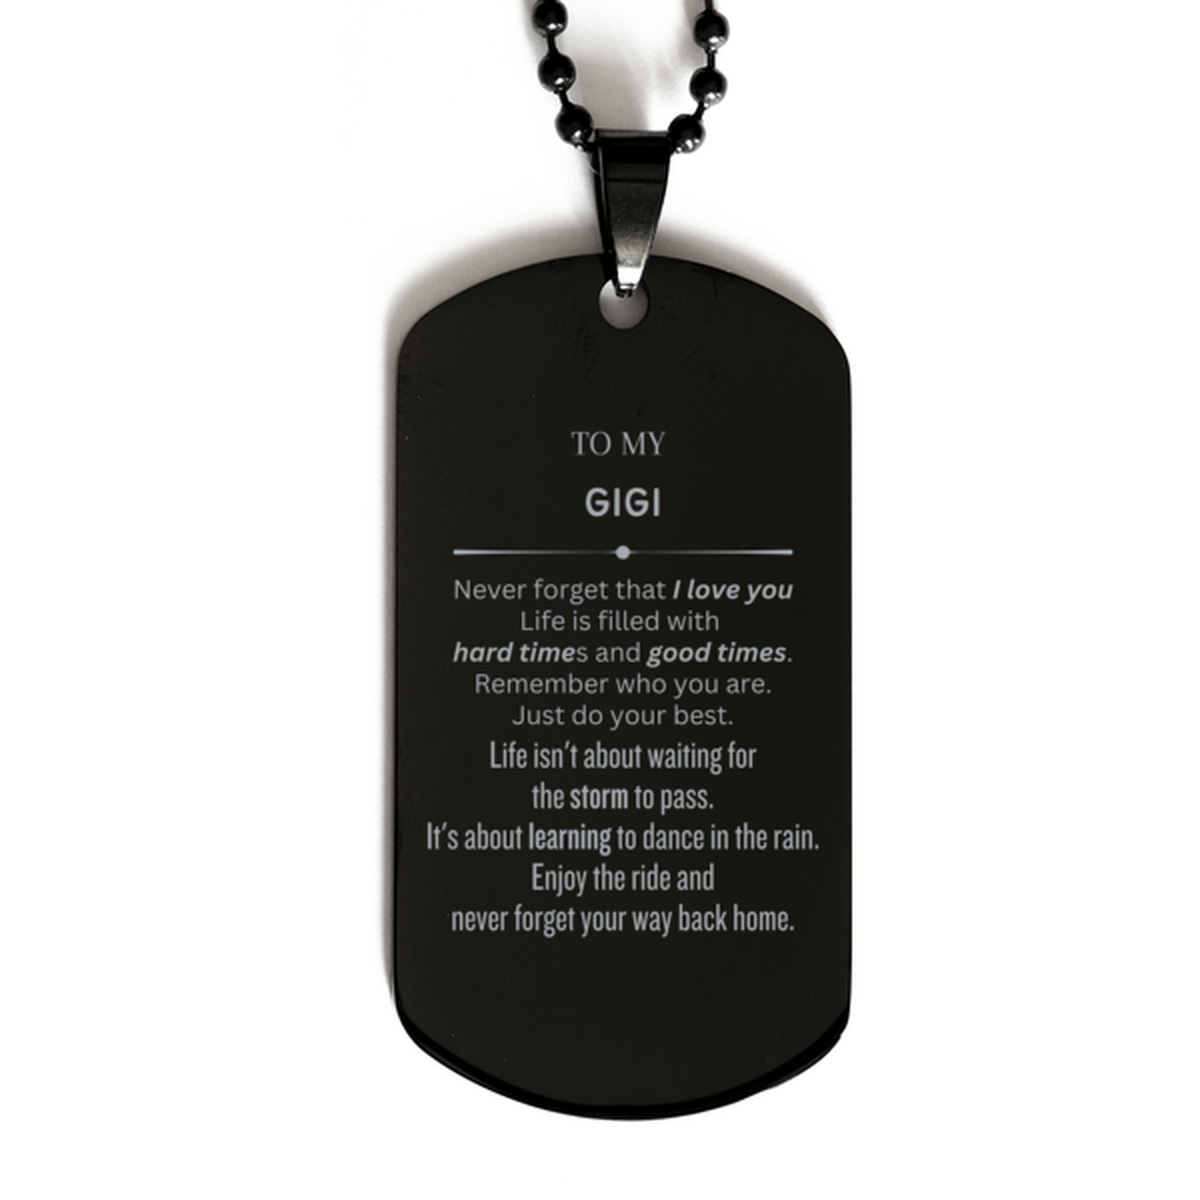 Christmas Gigi Black Dog Tag Gifts, To My Gigi Birthday Thank You Gifts For Gigi, Graduation Unique Gifts For Gigi To My Gigi Never forget that I love you life is filled with hard times and good times. Remember who you are. Just do your best